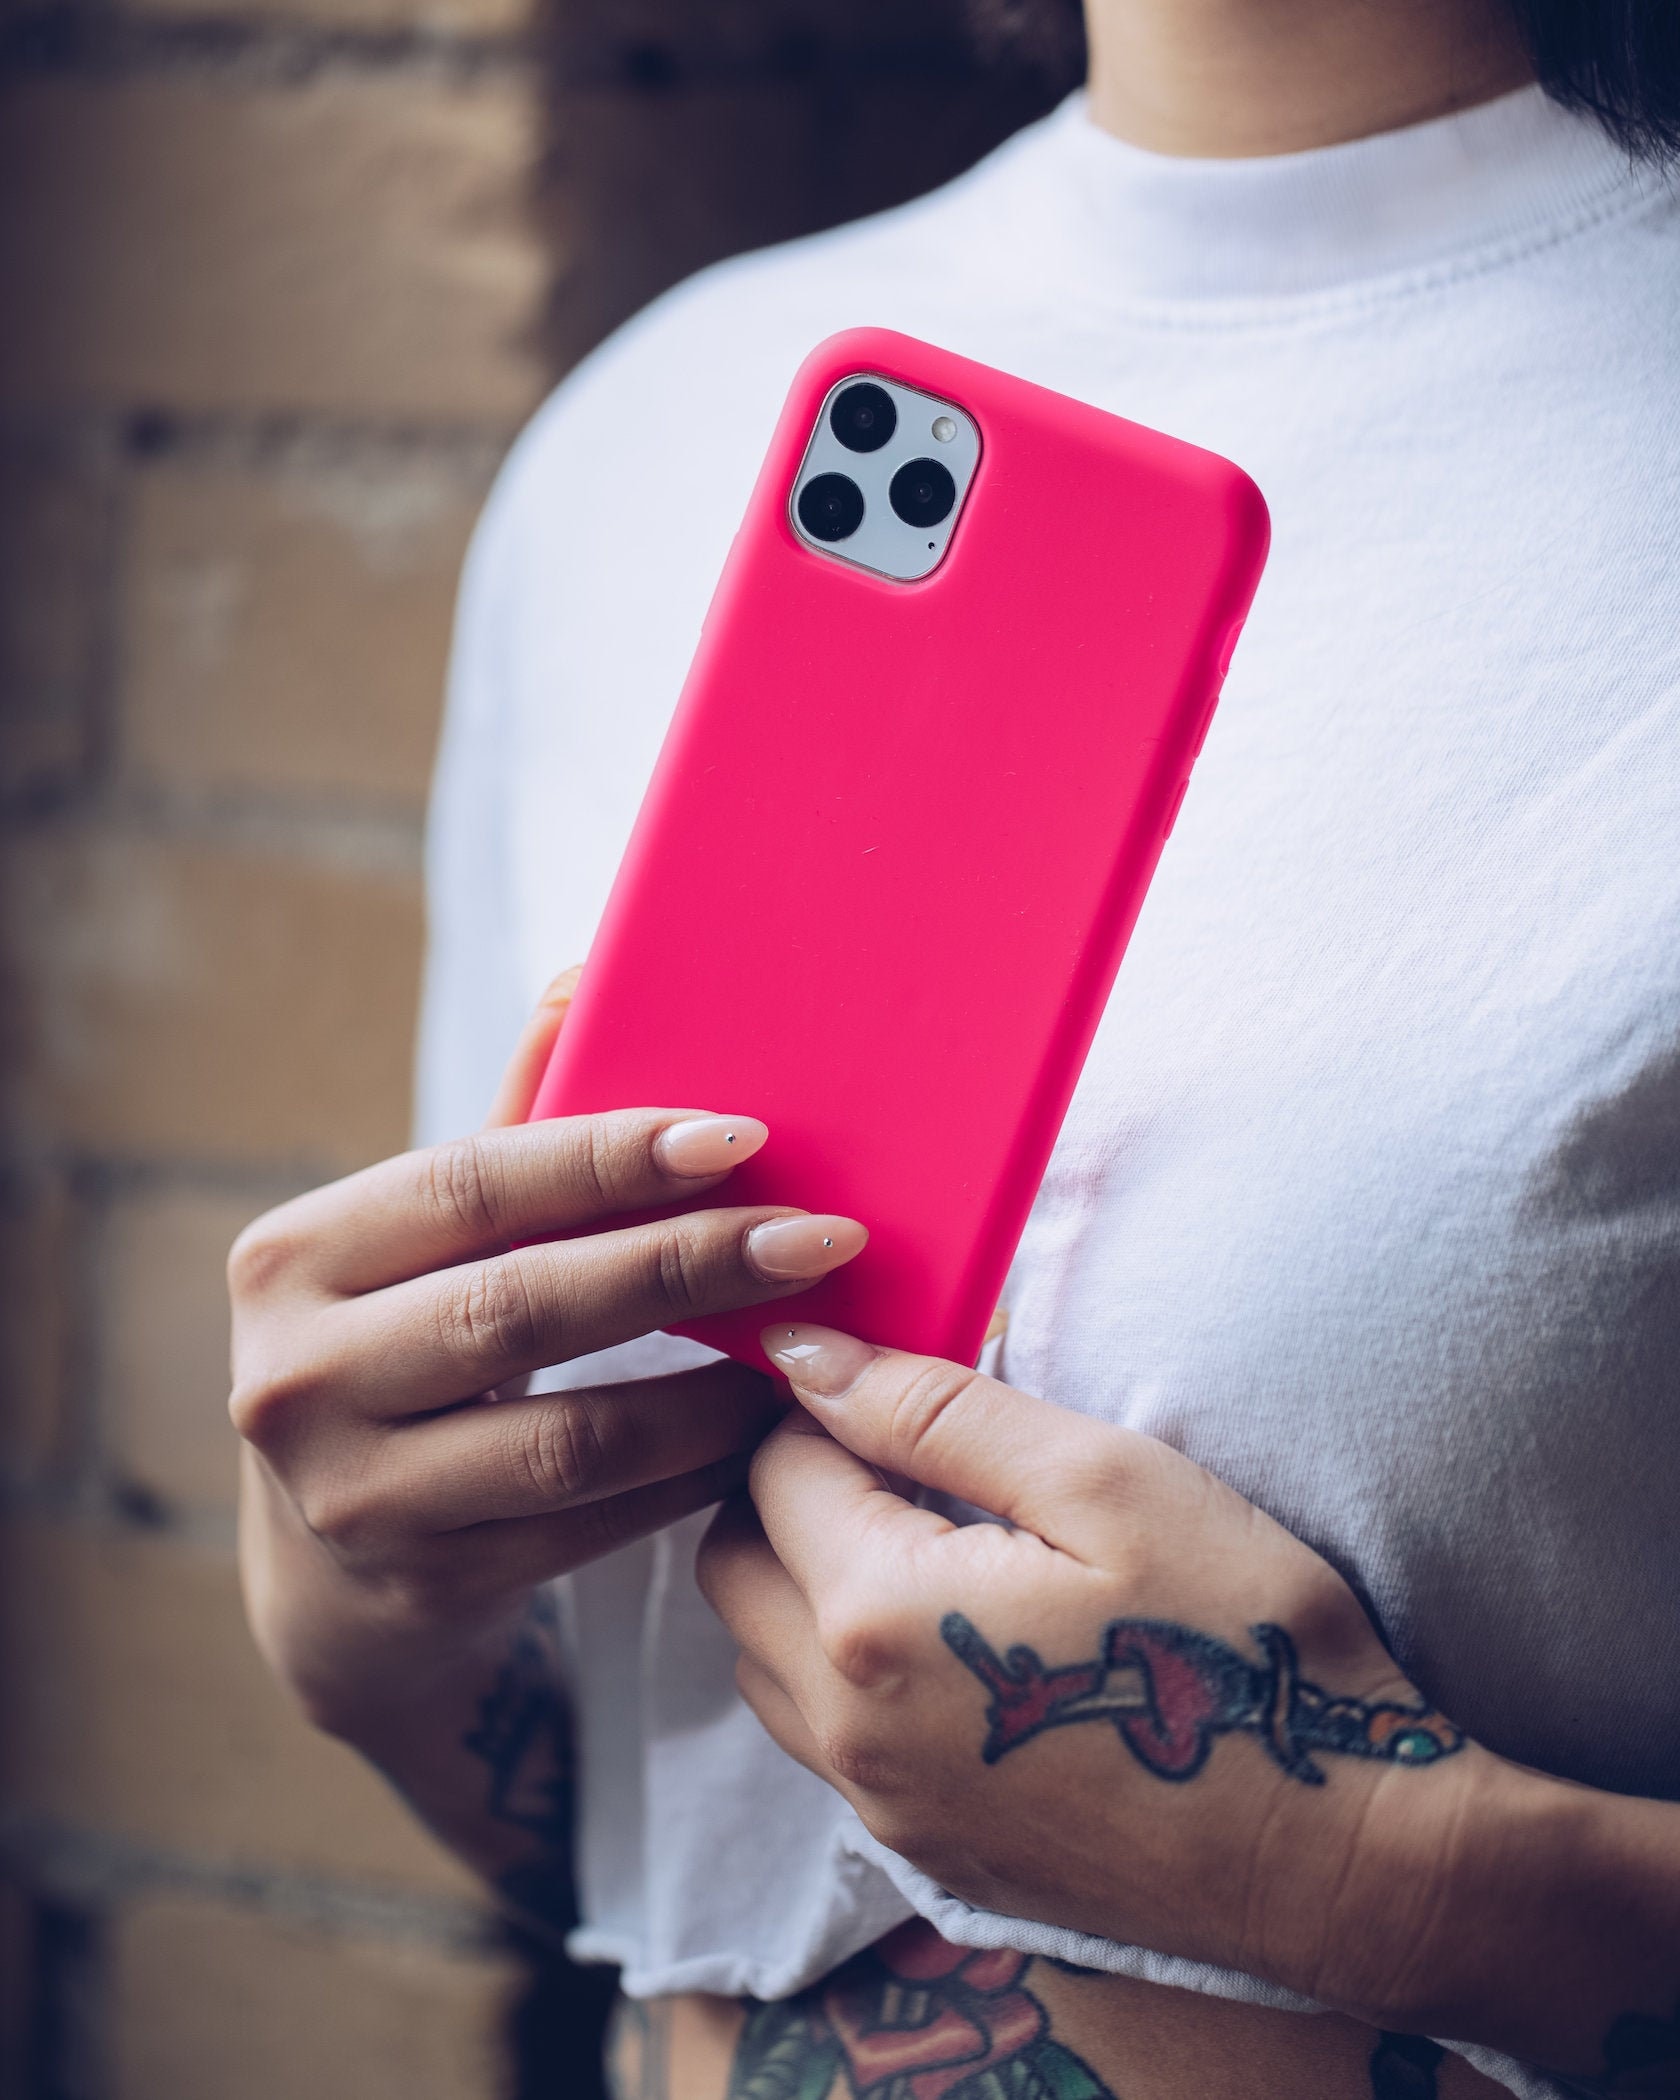 IPhone 15 Case, iPhone 15 Plus Case iPhone 15 Pro Case, iPhone 15 Pro Max  Case BLINDINGLY BRIGHT Neon Pink Silicone iPhone 15 Silicone Case 